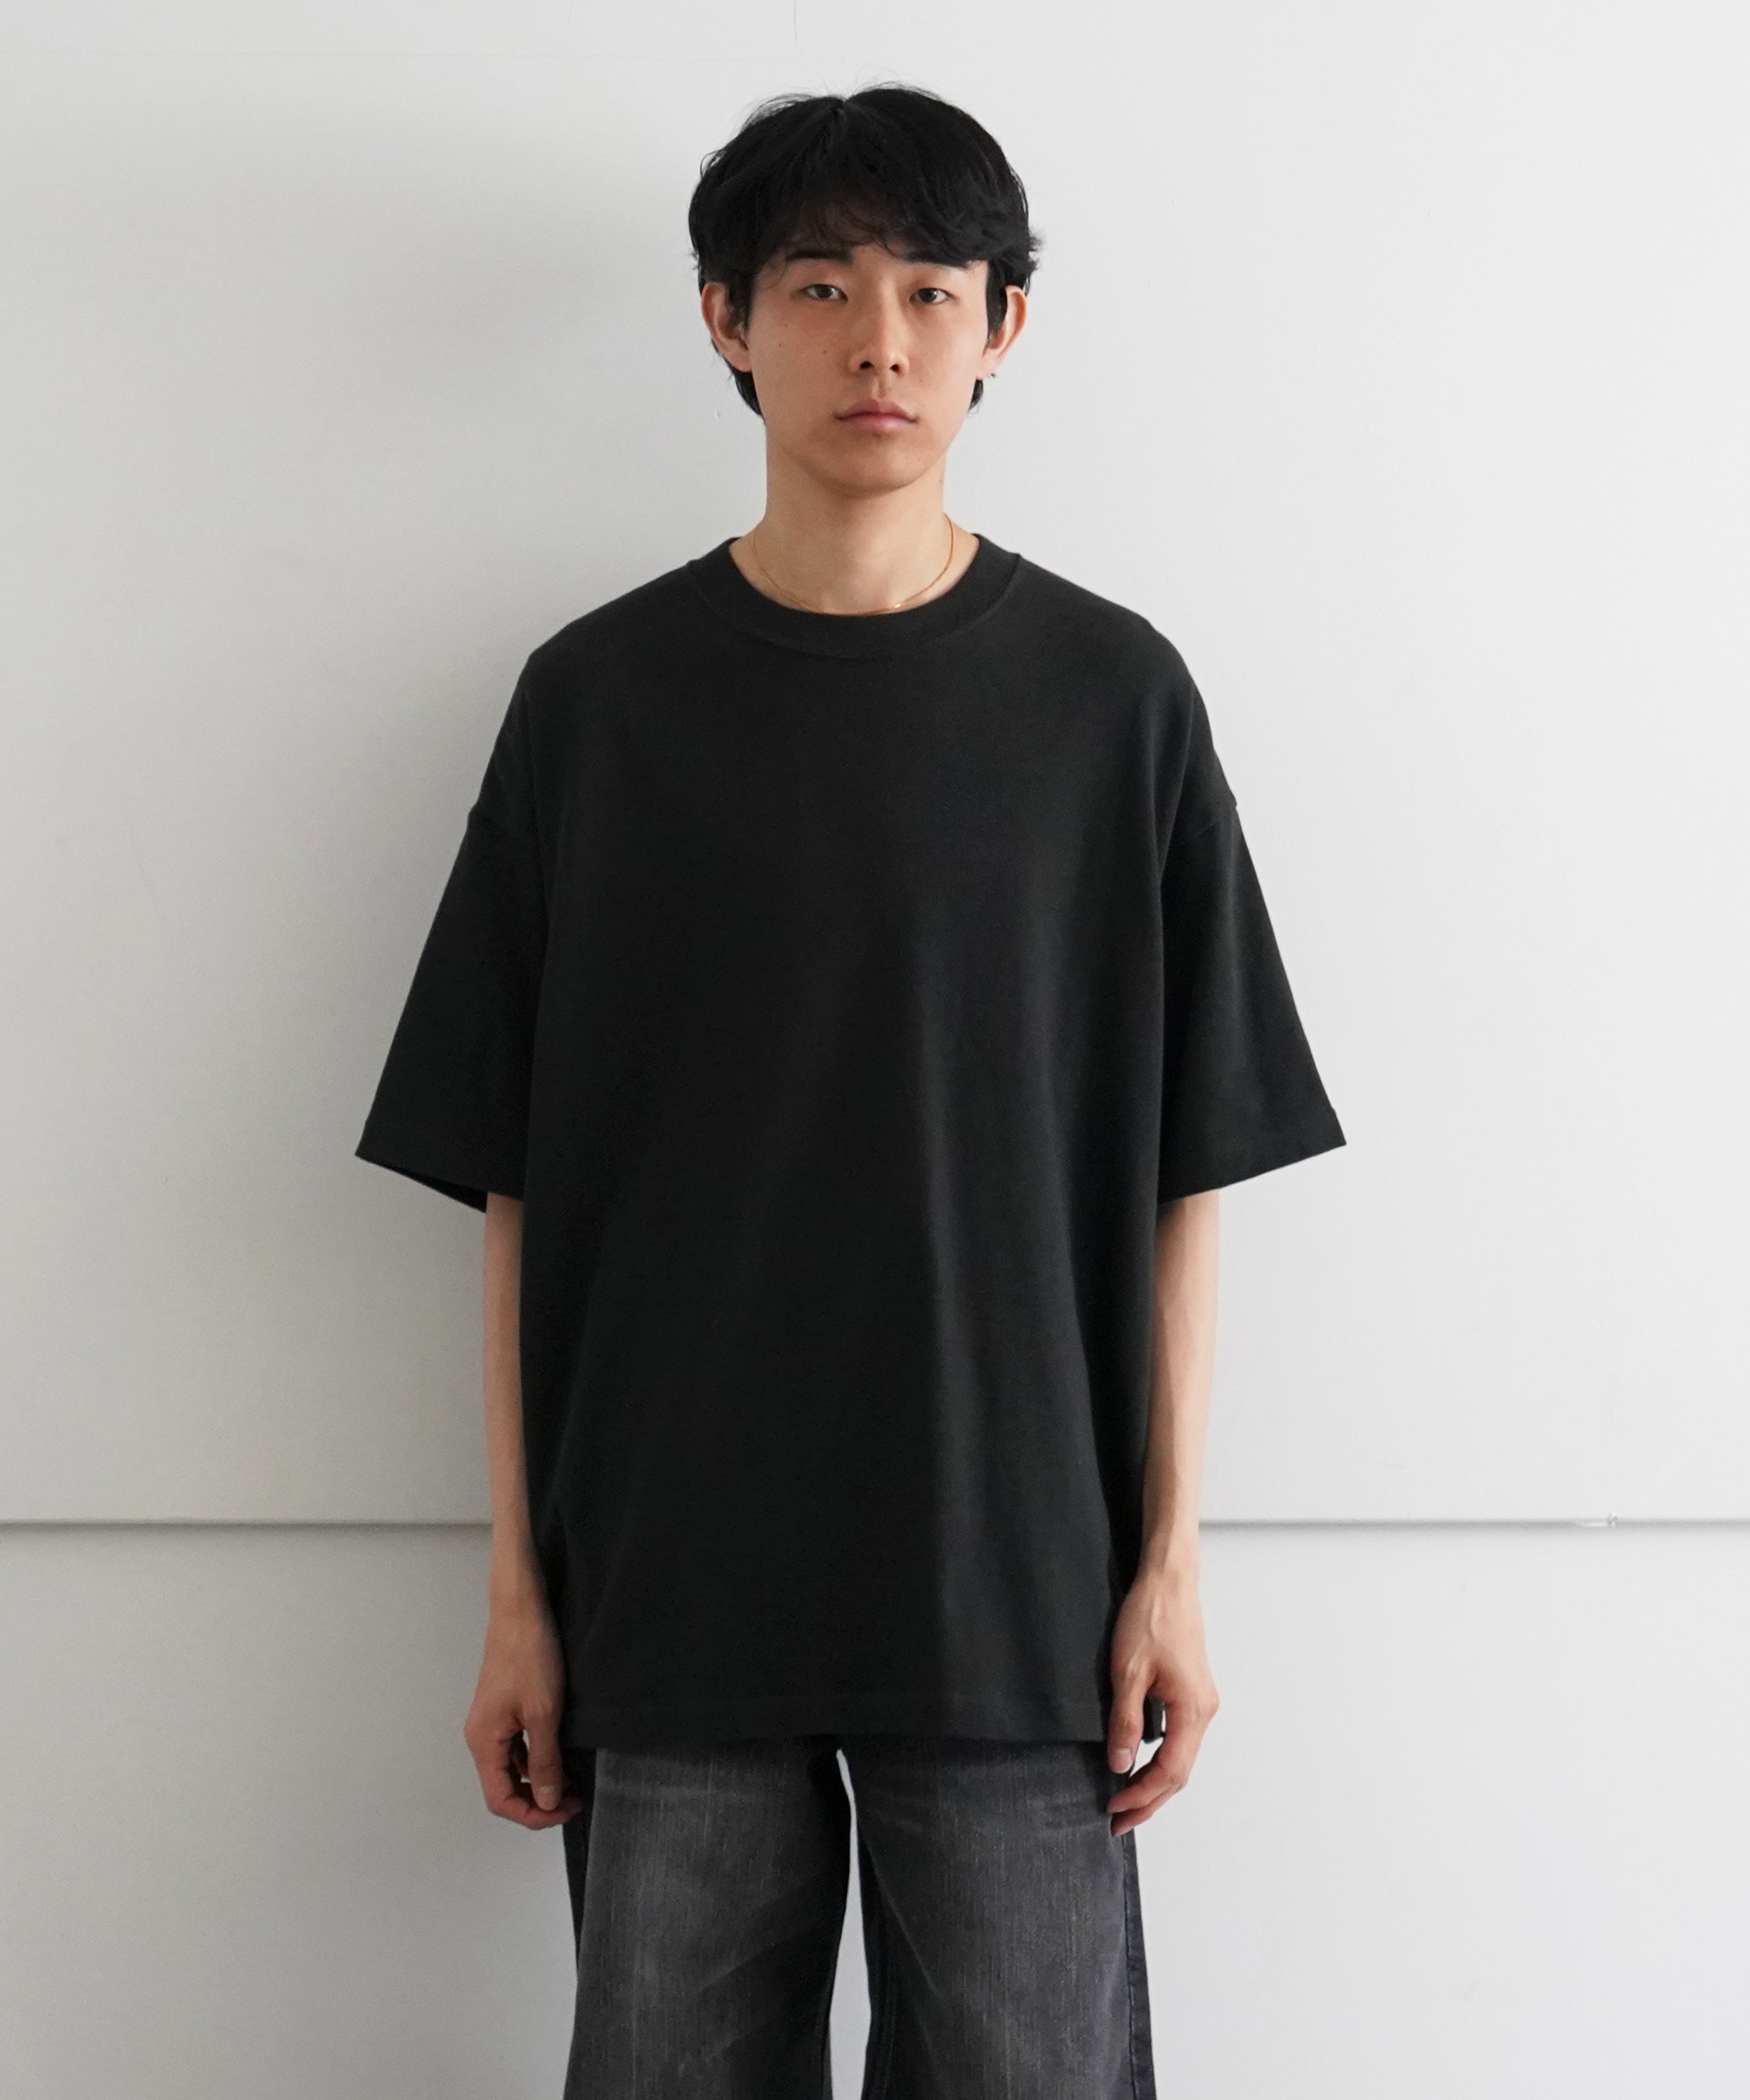 EVCON WIDE S/S T-SHIRT "GRAY"